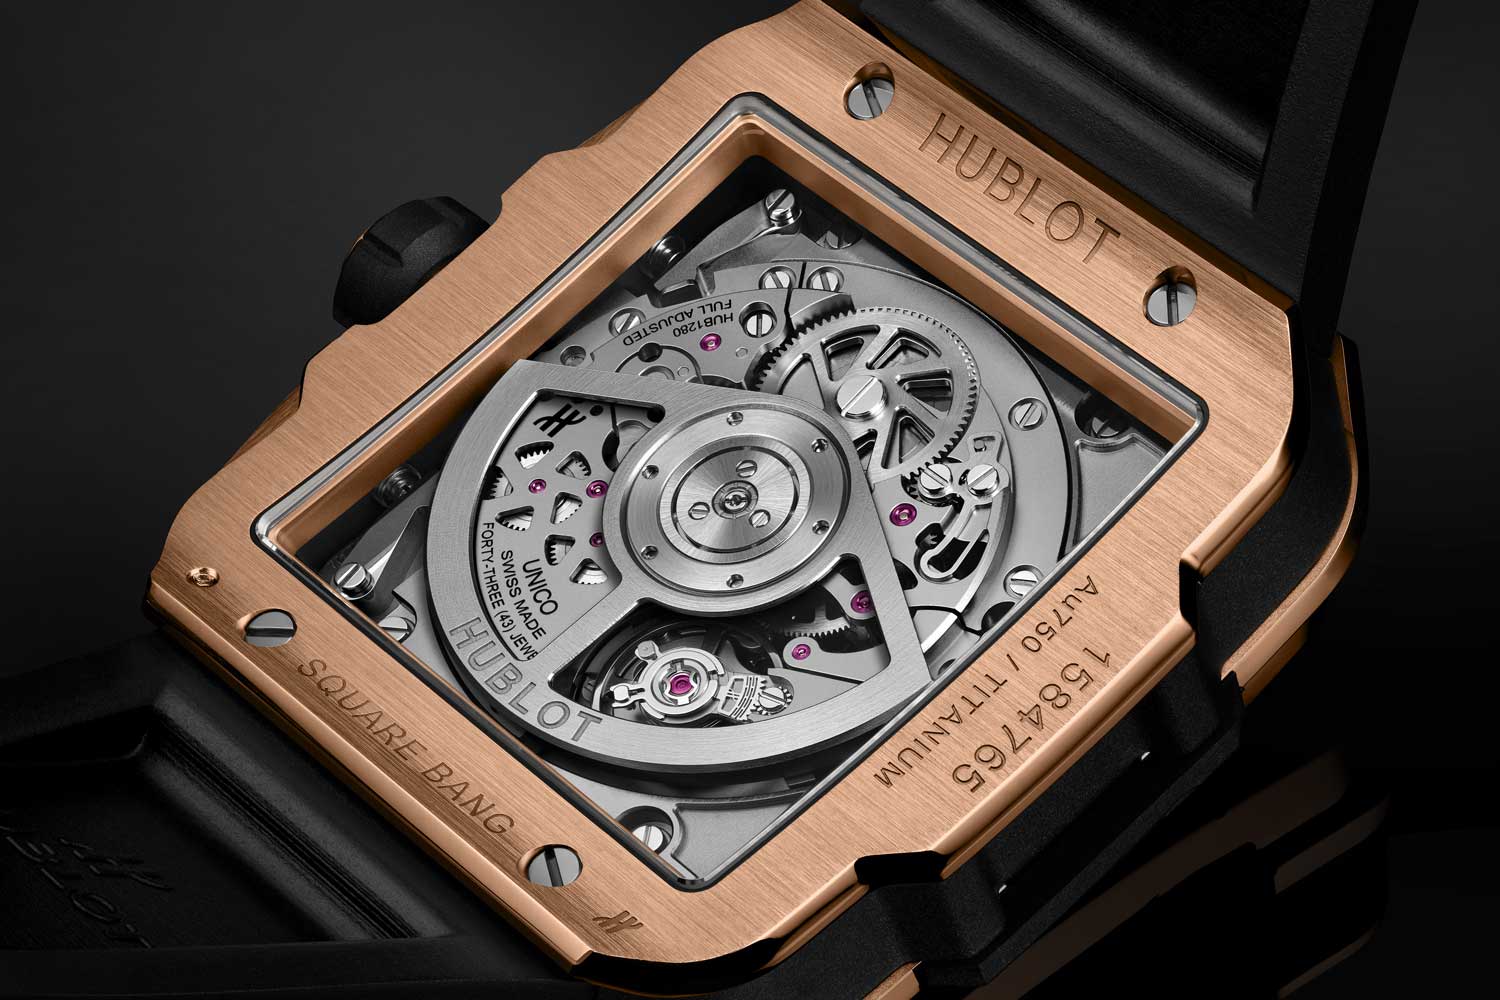 A round movement in a square case, the HUB 1280